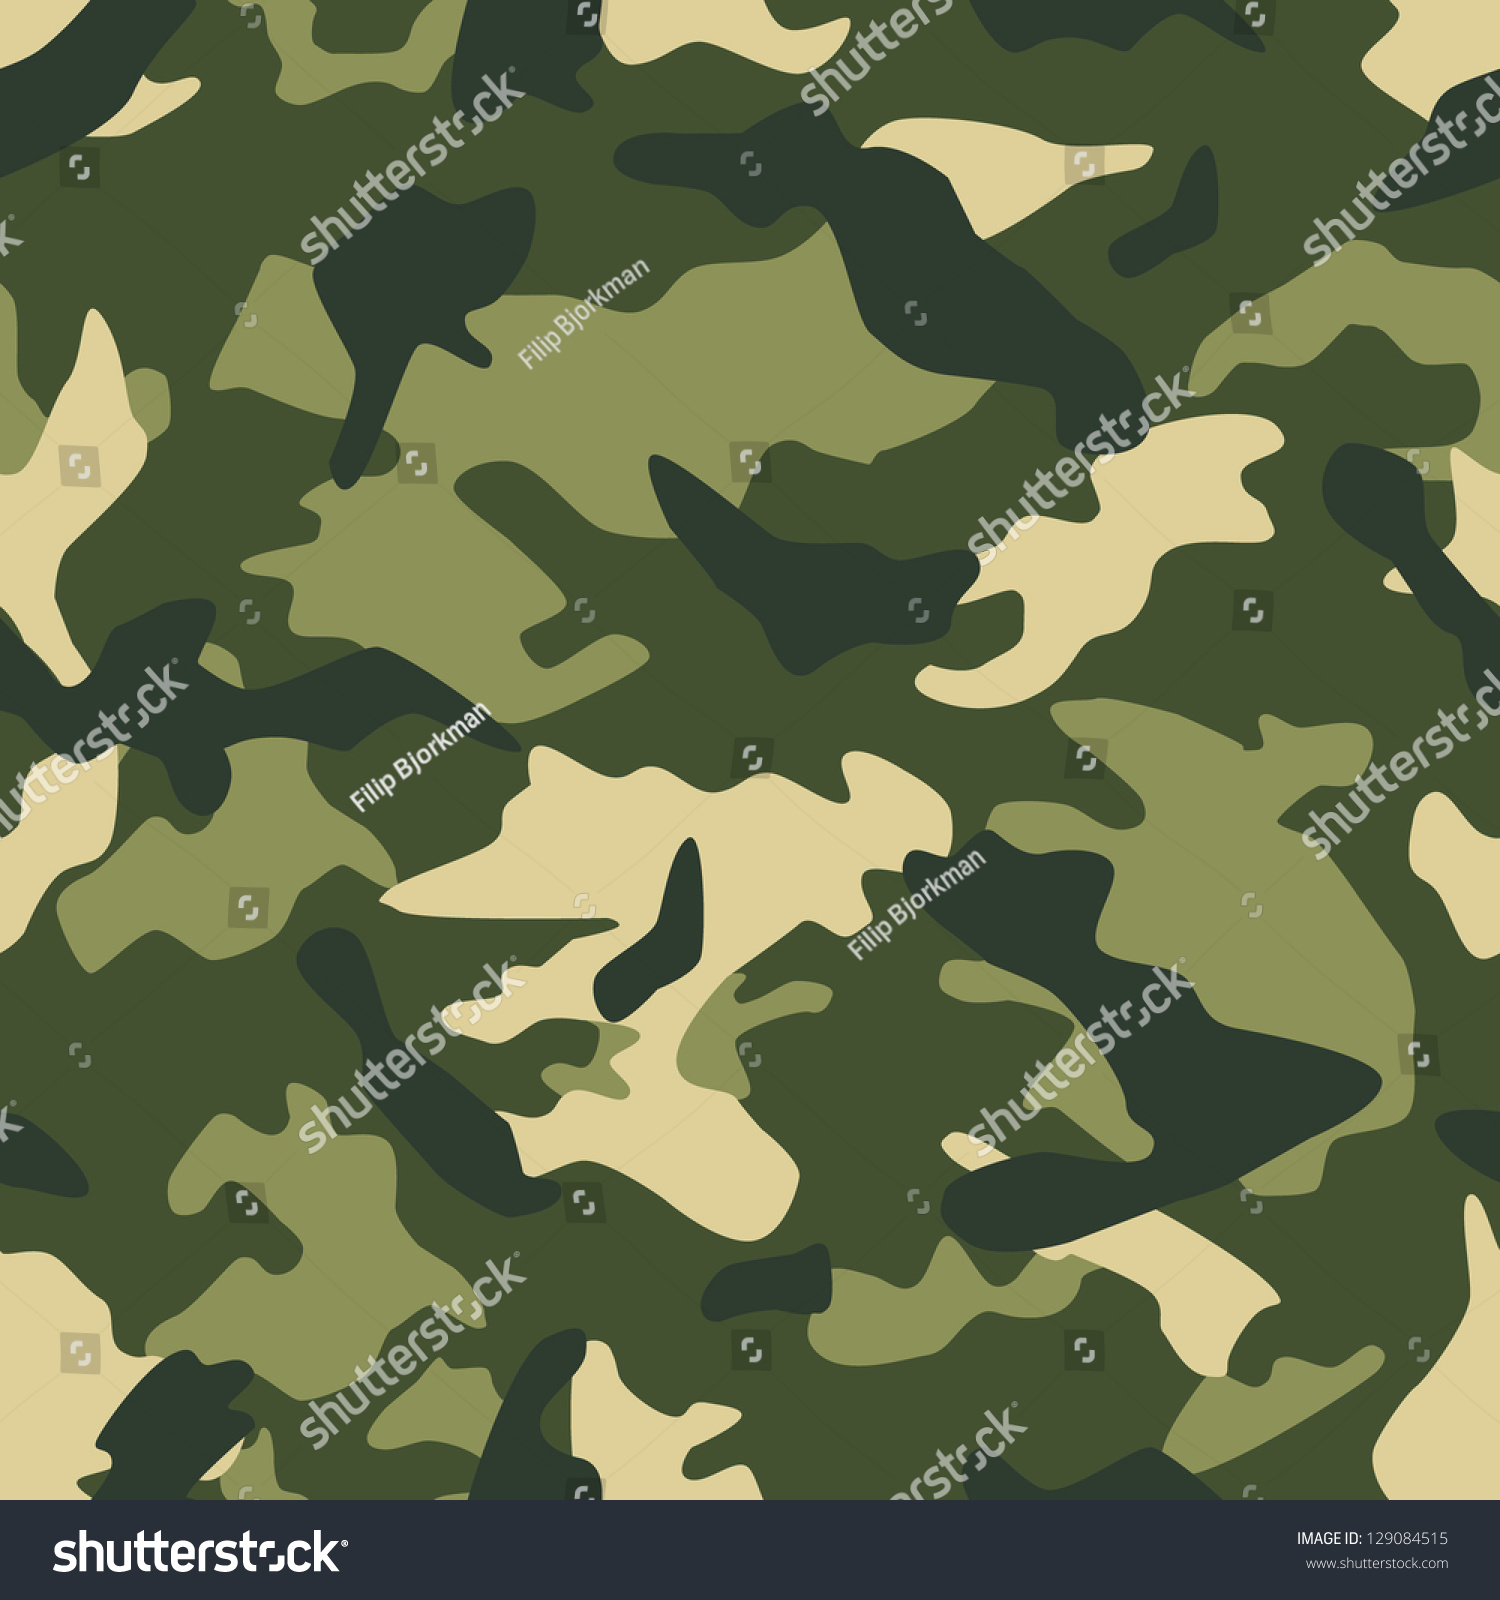 Seamless Vector Square Camouflage Series In The Green Scheme ...